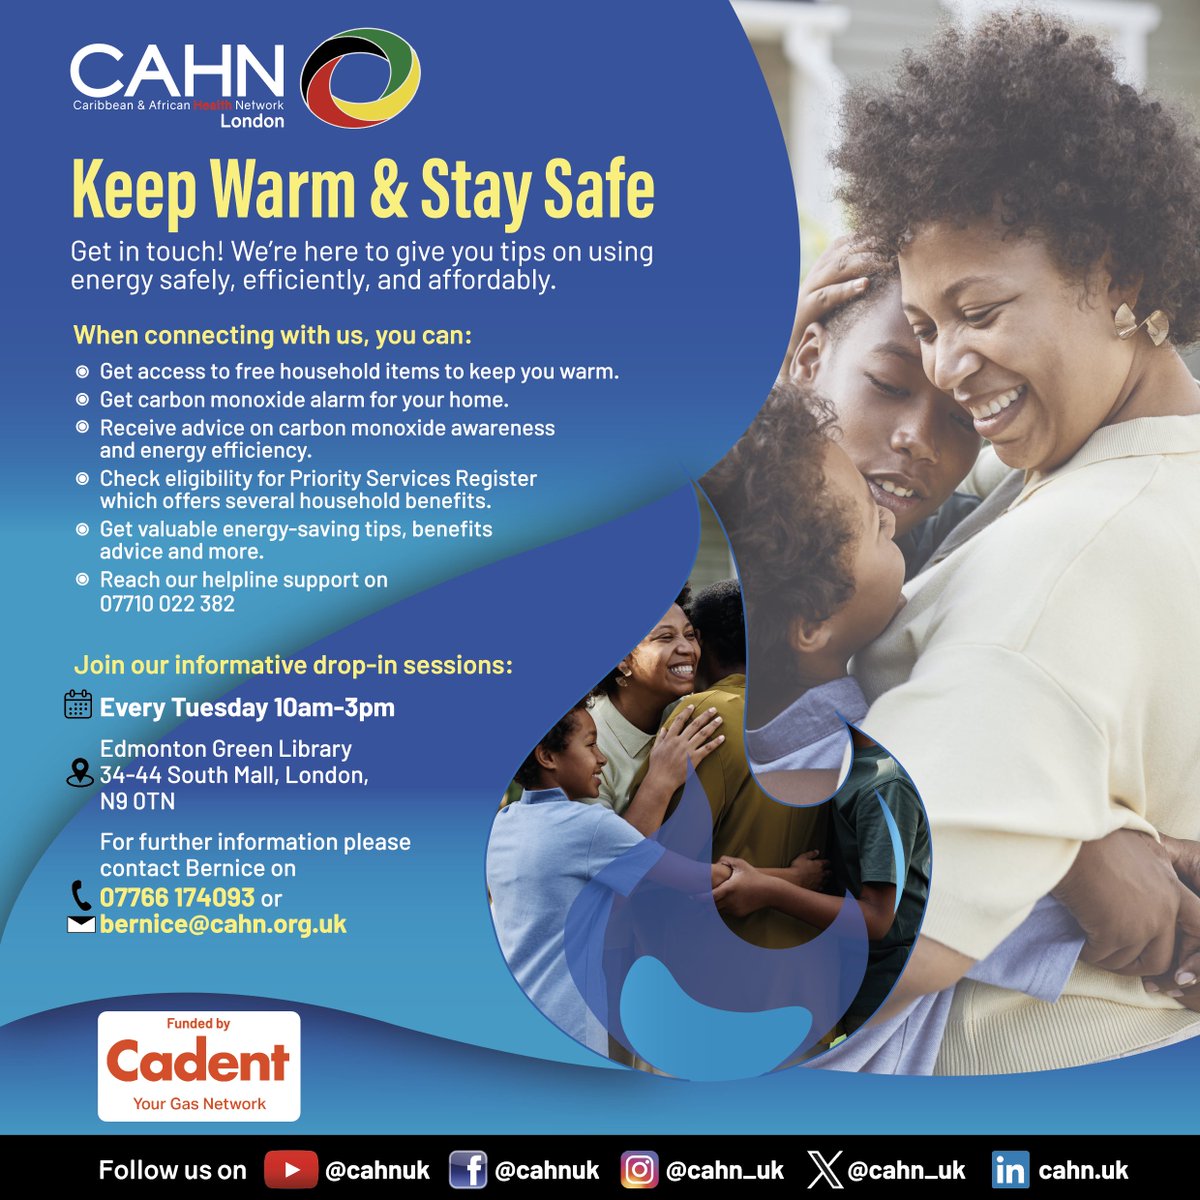 Resilient Informed Black Community! We are here to help. Access free household items, learn to recognise carbon monoxide signs, enjoy drop in-sessions and more. #Enfield Connect with Bernice at 07766174093 or bernice@cahn.org.uk. @CadentGasLtd #CAD24